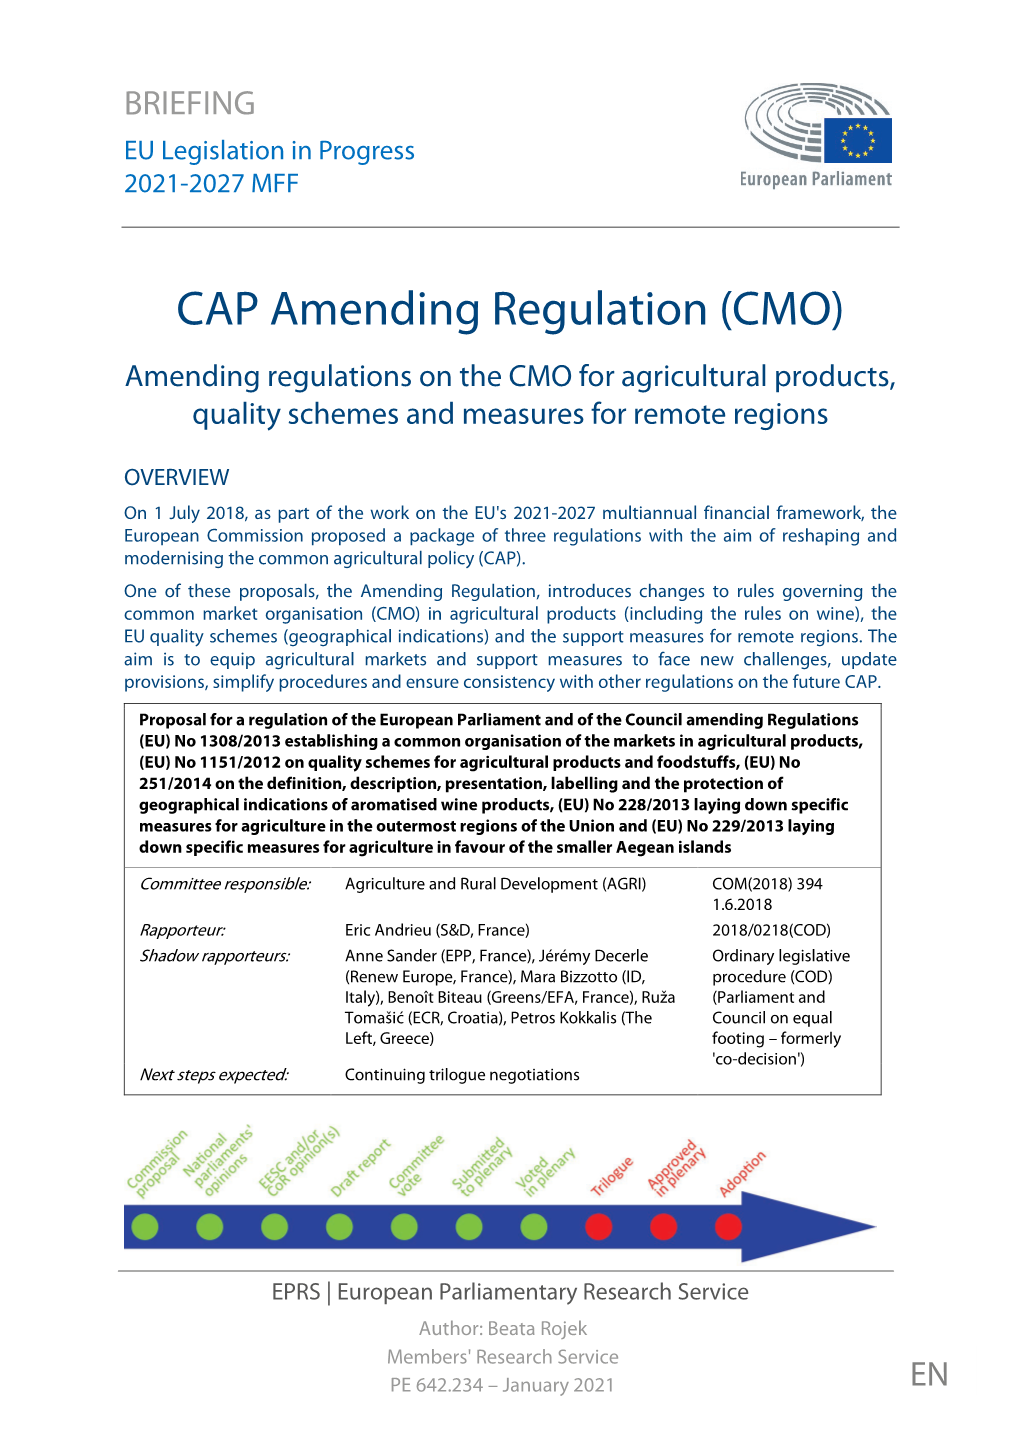 CAP Amending Regulation (CMO) Amending Regulations on the CMO for Agricultural Products, Quality Schemes and Measures for Remote Regions